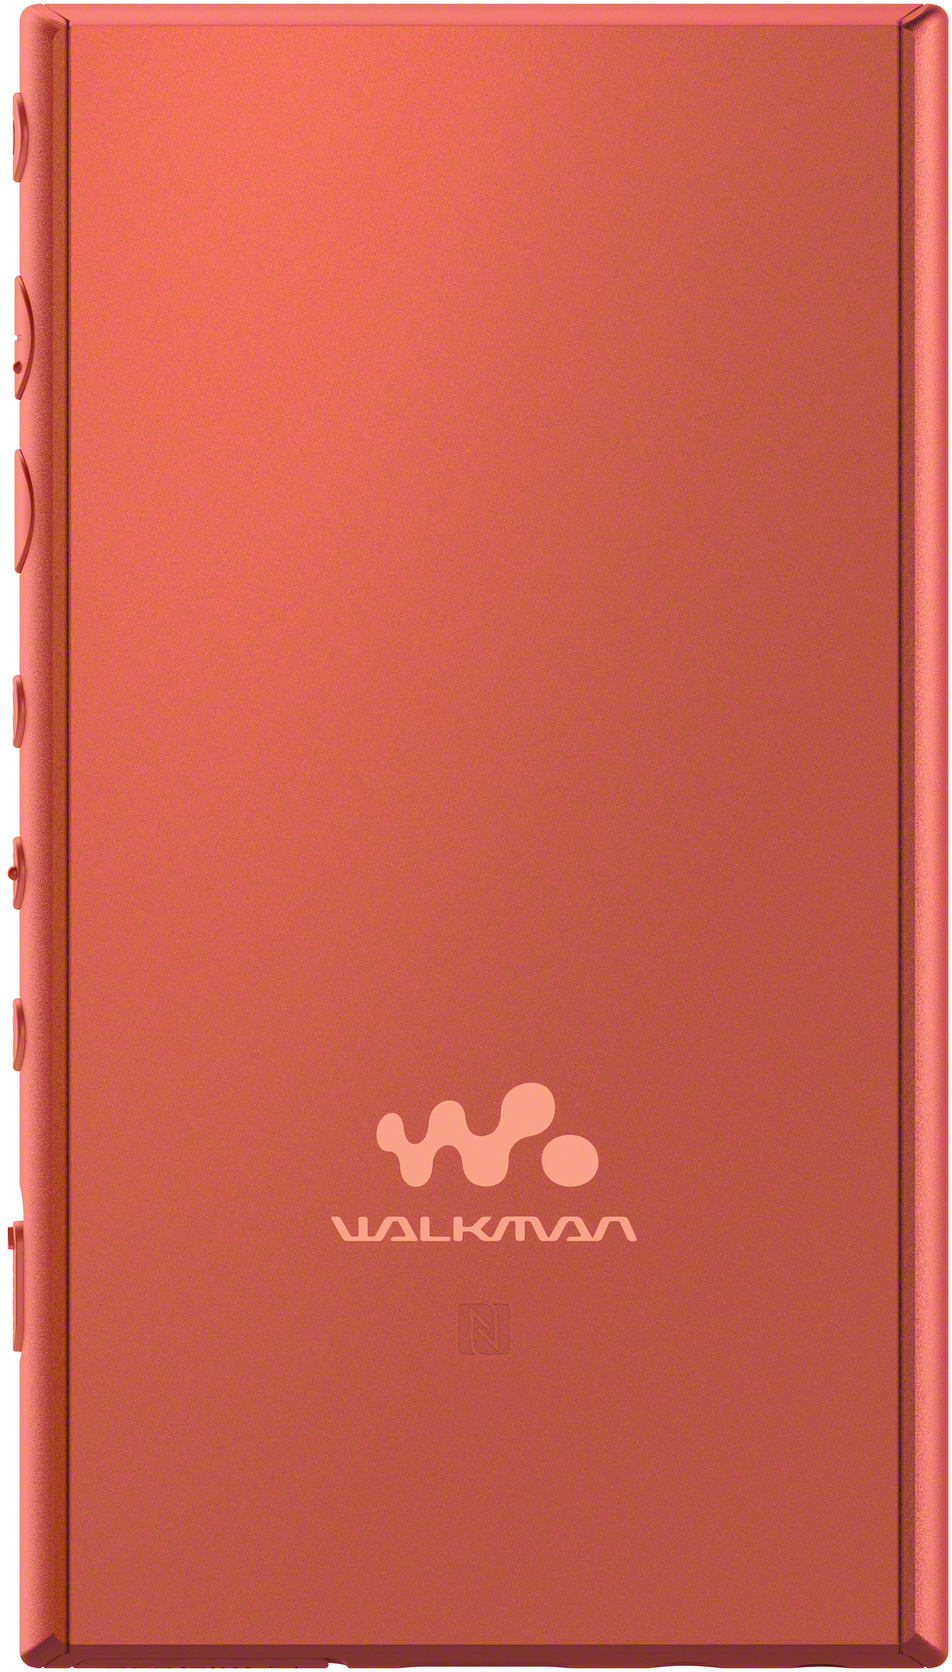 NW-A105 16 Walkman SONY 9.0 GB, Android Orange Mp3-Player